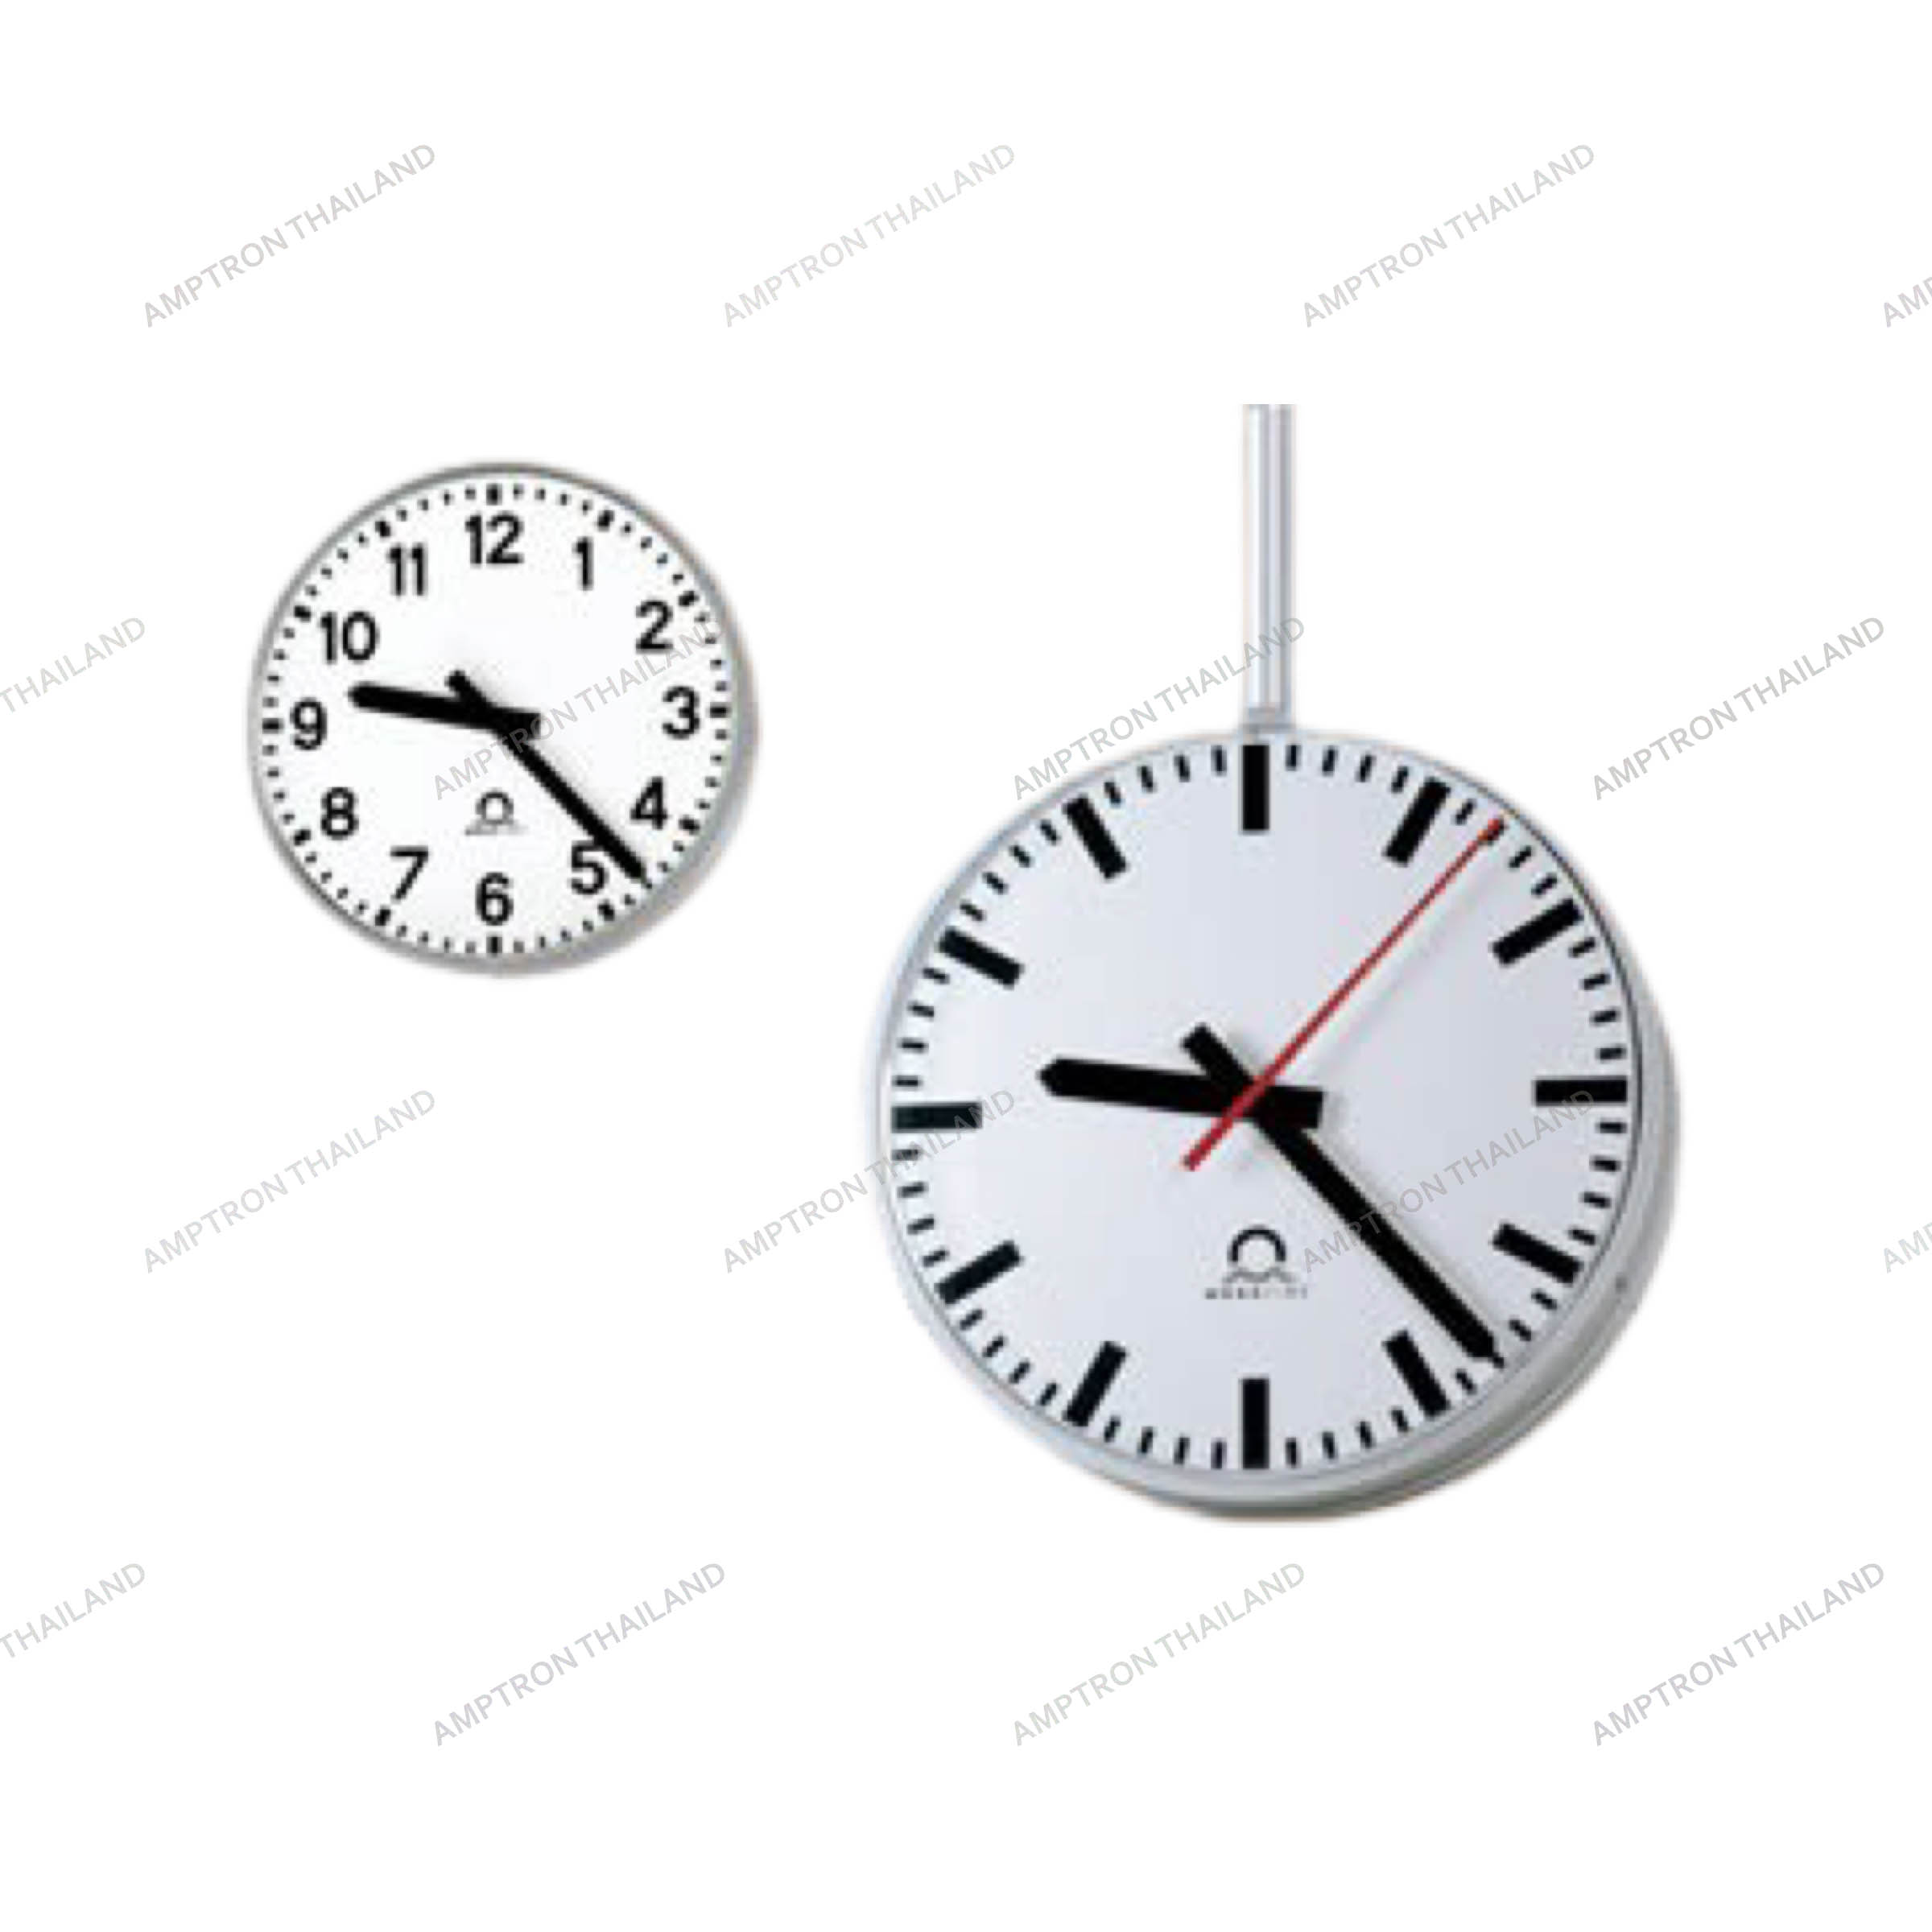 Metroline outdoor analog clocks for commercial, industrial and transportation applications